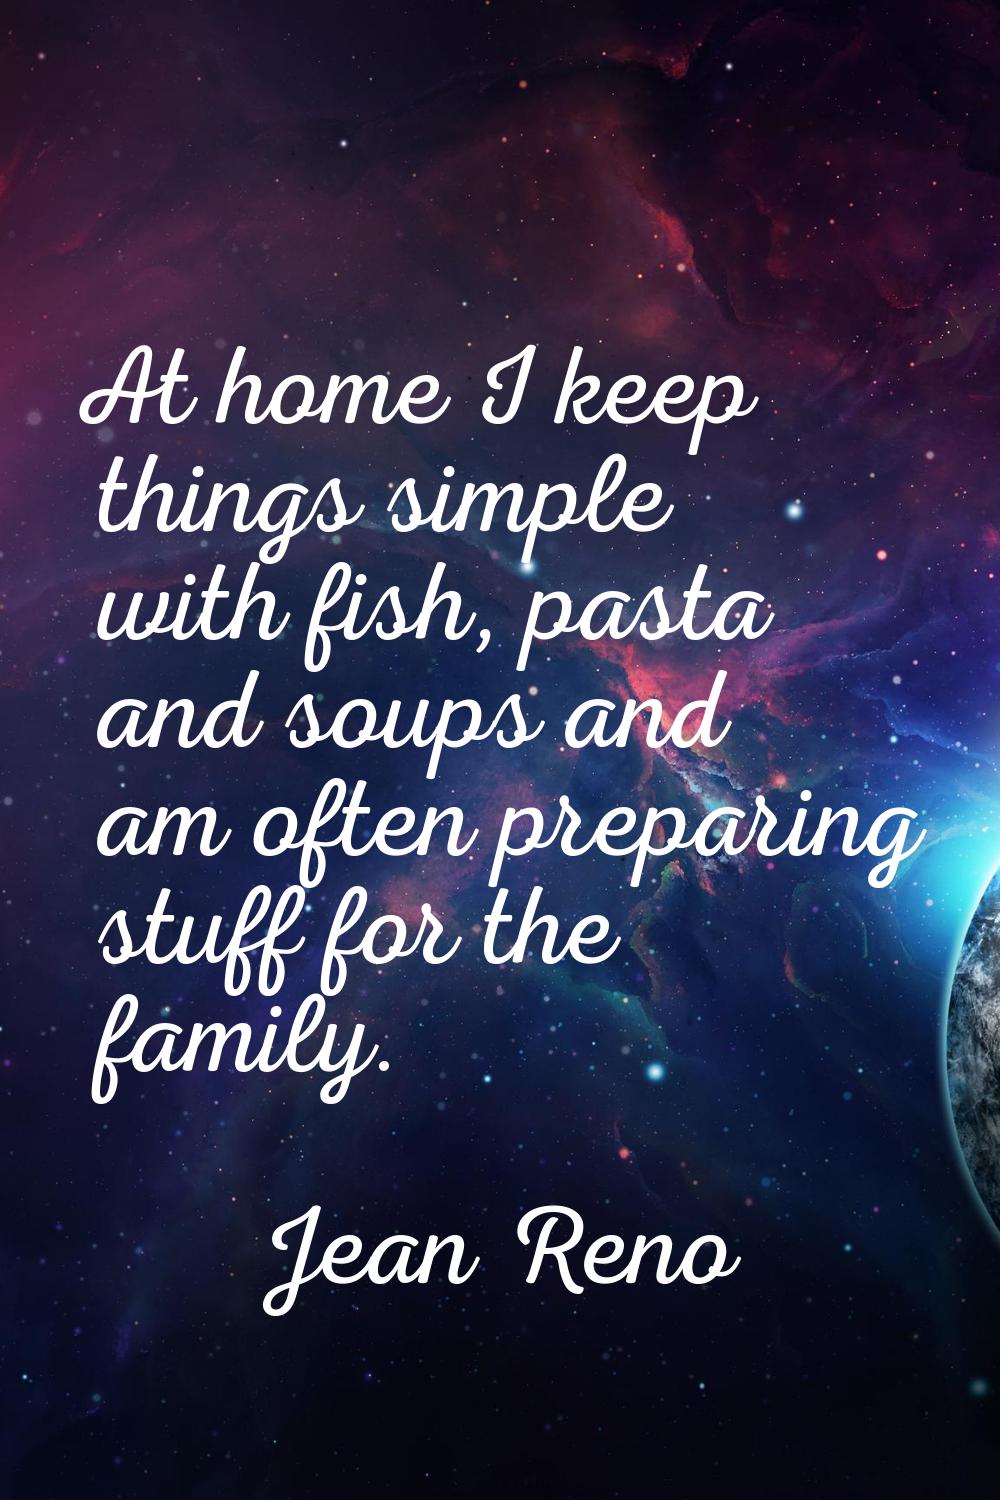 At home I keep things simple with fish, pasta and soups and am often preparing stuff for the family